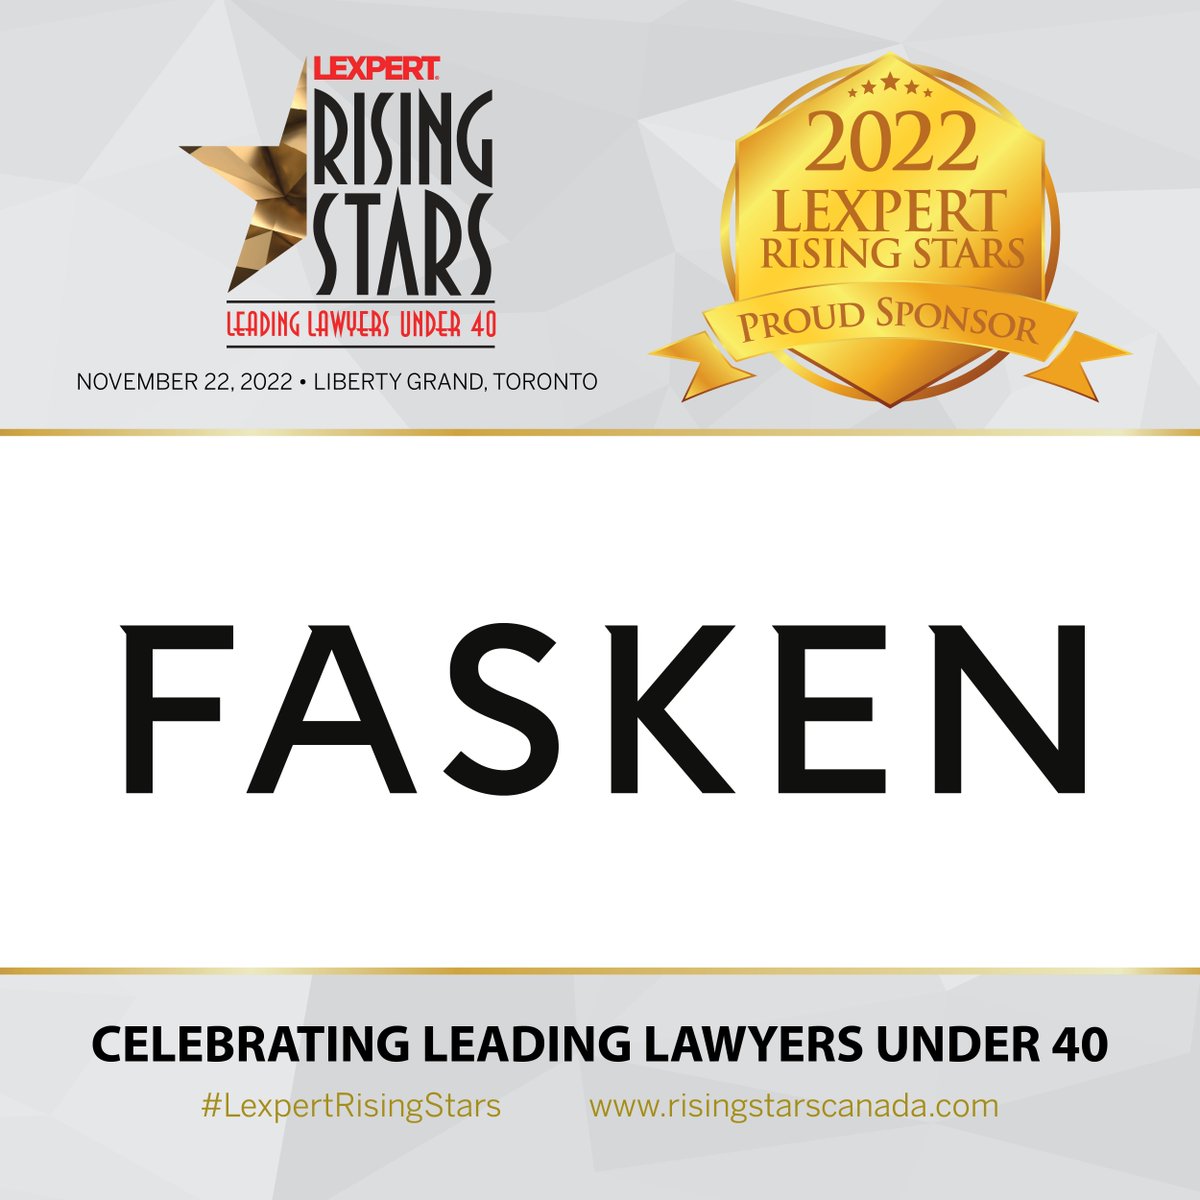 The 2022 Lexpert Rising Star Awards is proudly supported by @FaskenLaw.

The red carpet rolls on November 22, 2022, at Liberty Grand, Toronto!

Learn more: hubs.ly/Q01sGvNn0
#LexpertRisingStars #LawyersCanada #CanadianLegal #LawyersofLinkedin #LawAwards #RisingStars